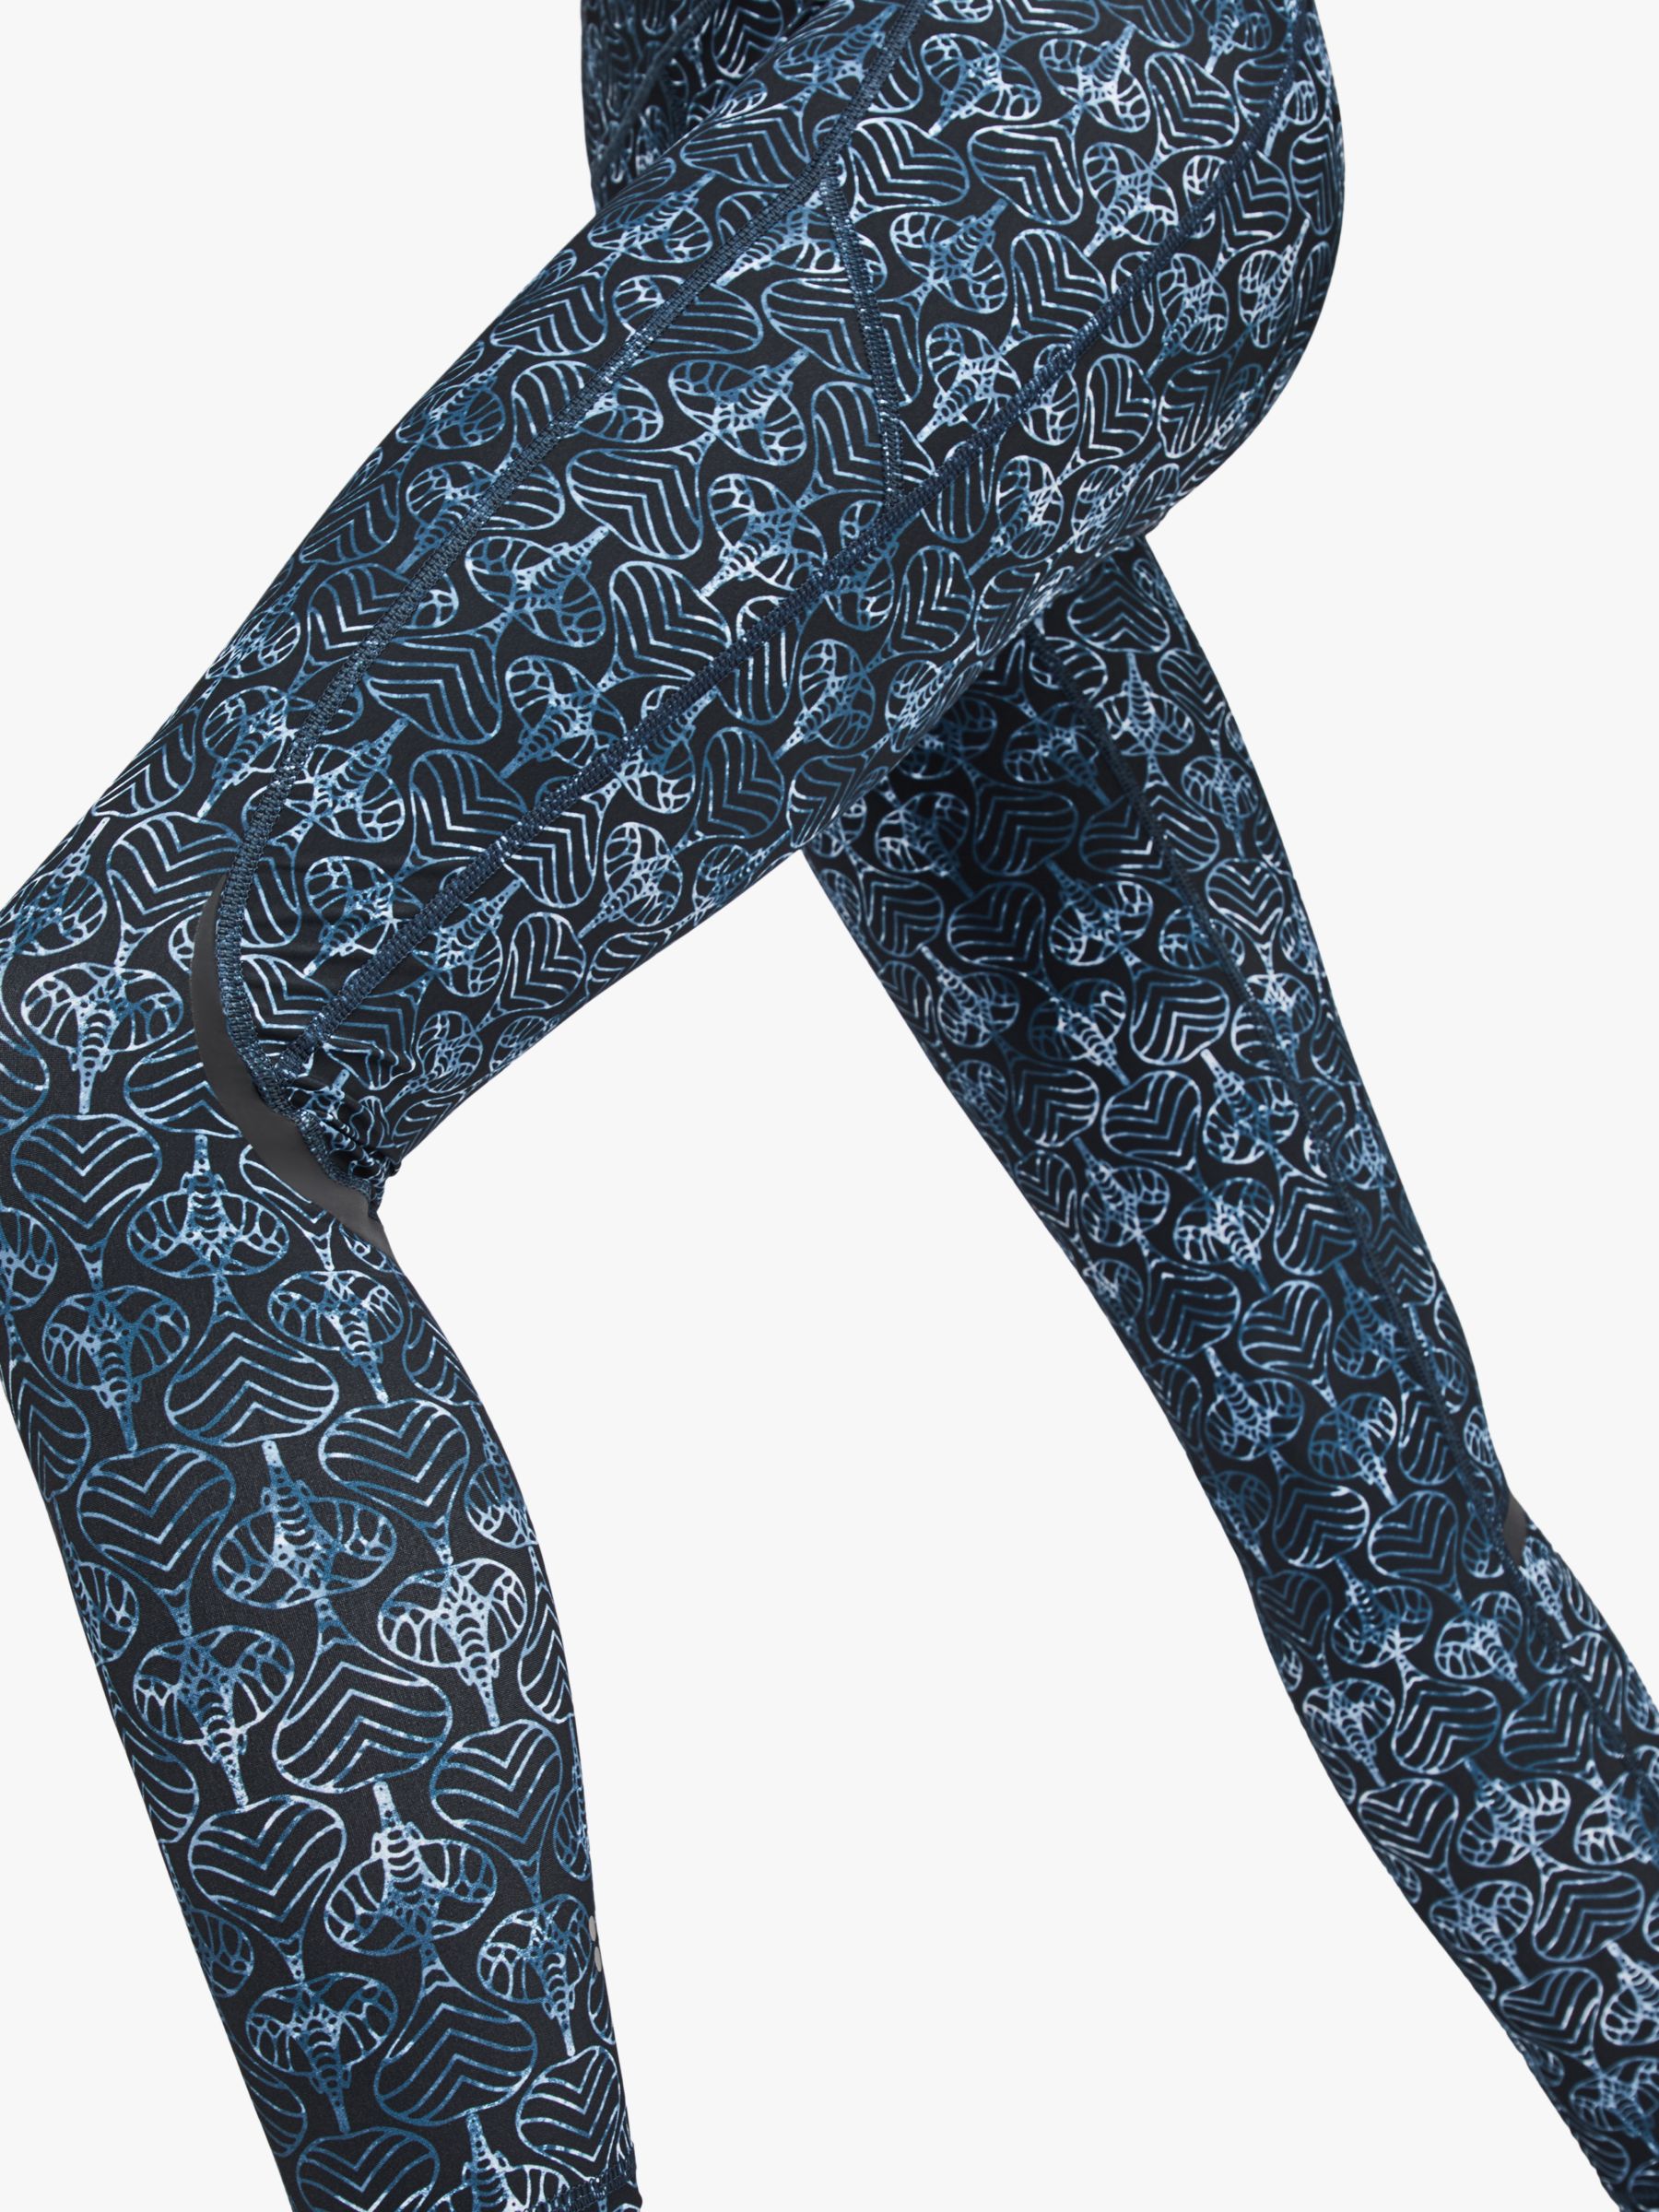 SWEATY BETTY TO The Beat Crop Dance Leggings. Reversible. Blue/Butterfly.  Small £33.99 - PicClick UK